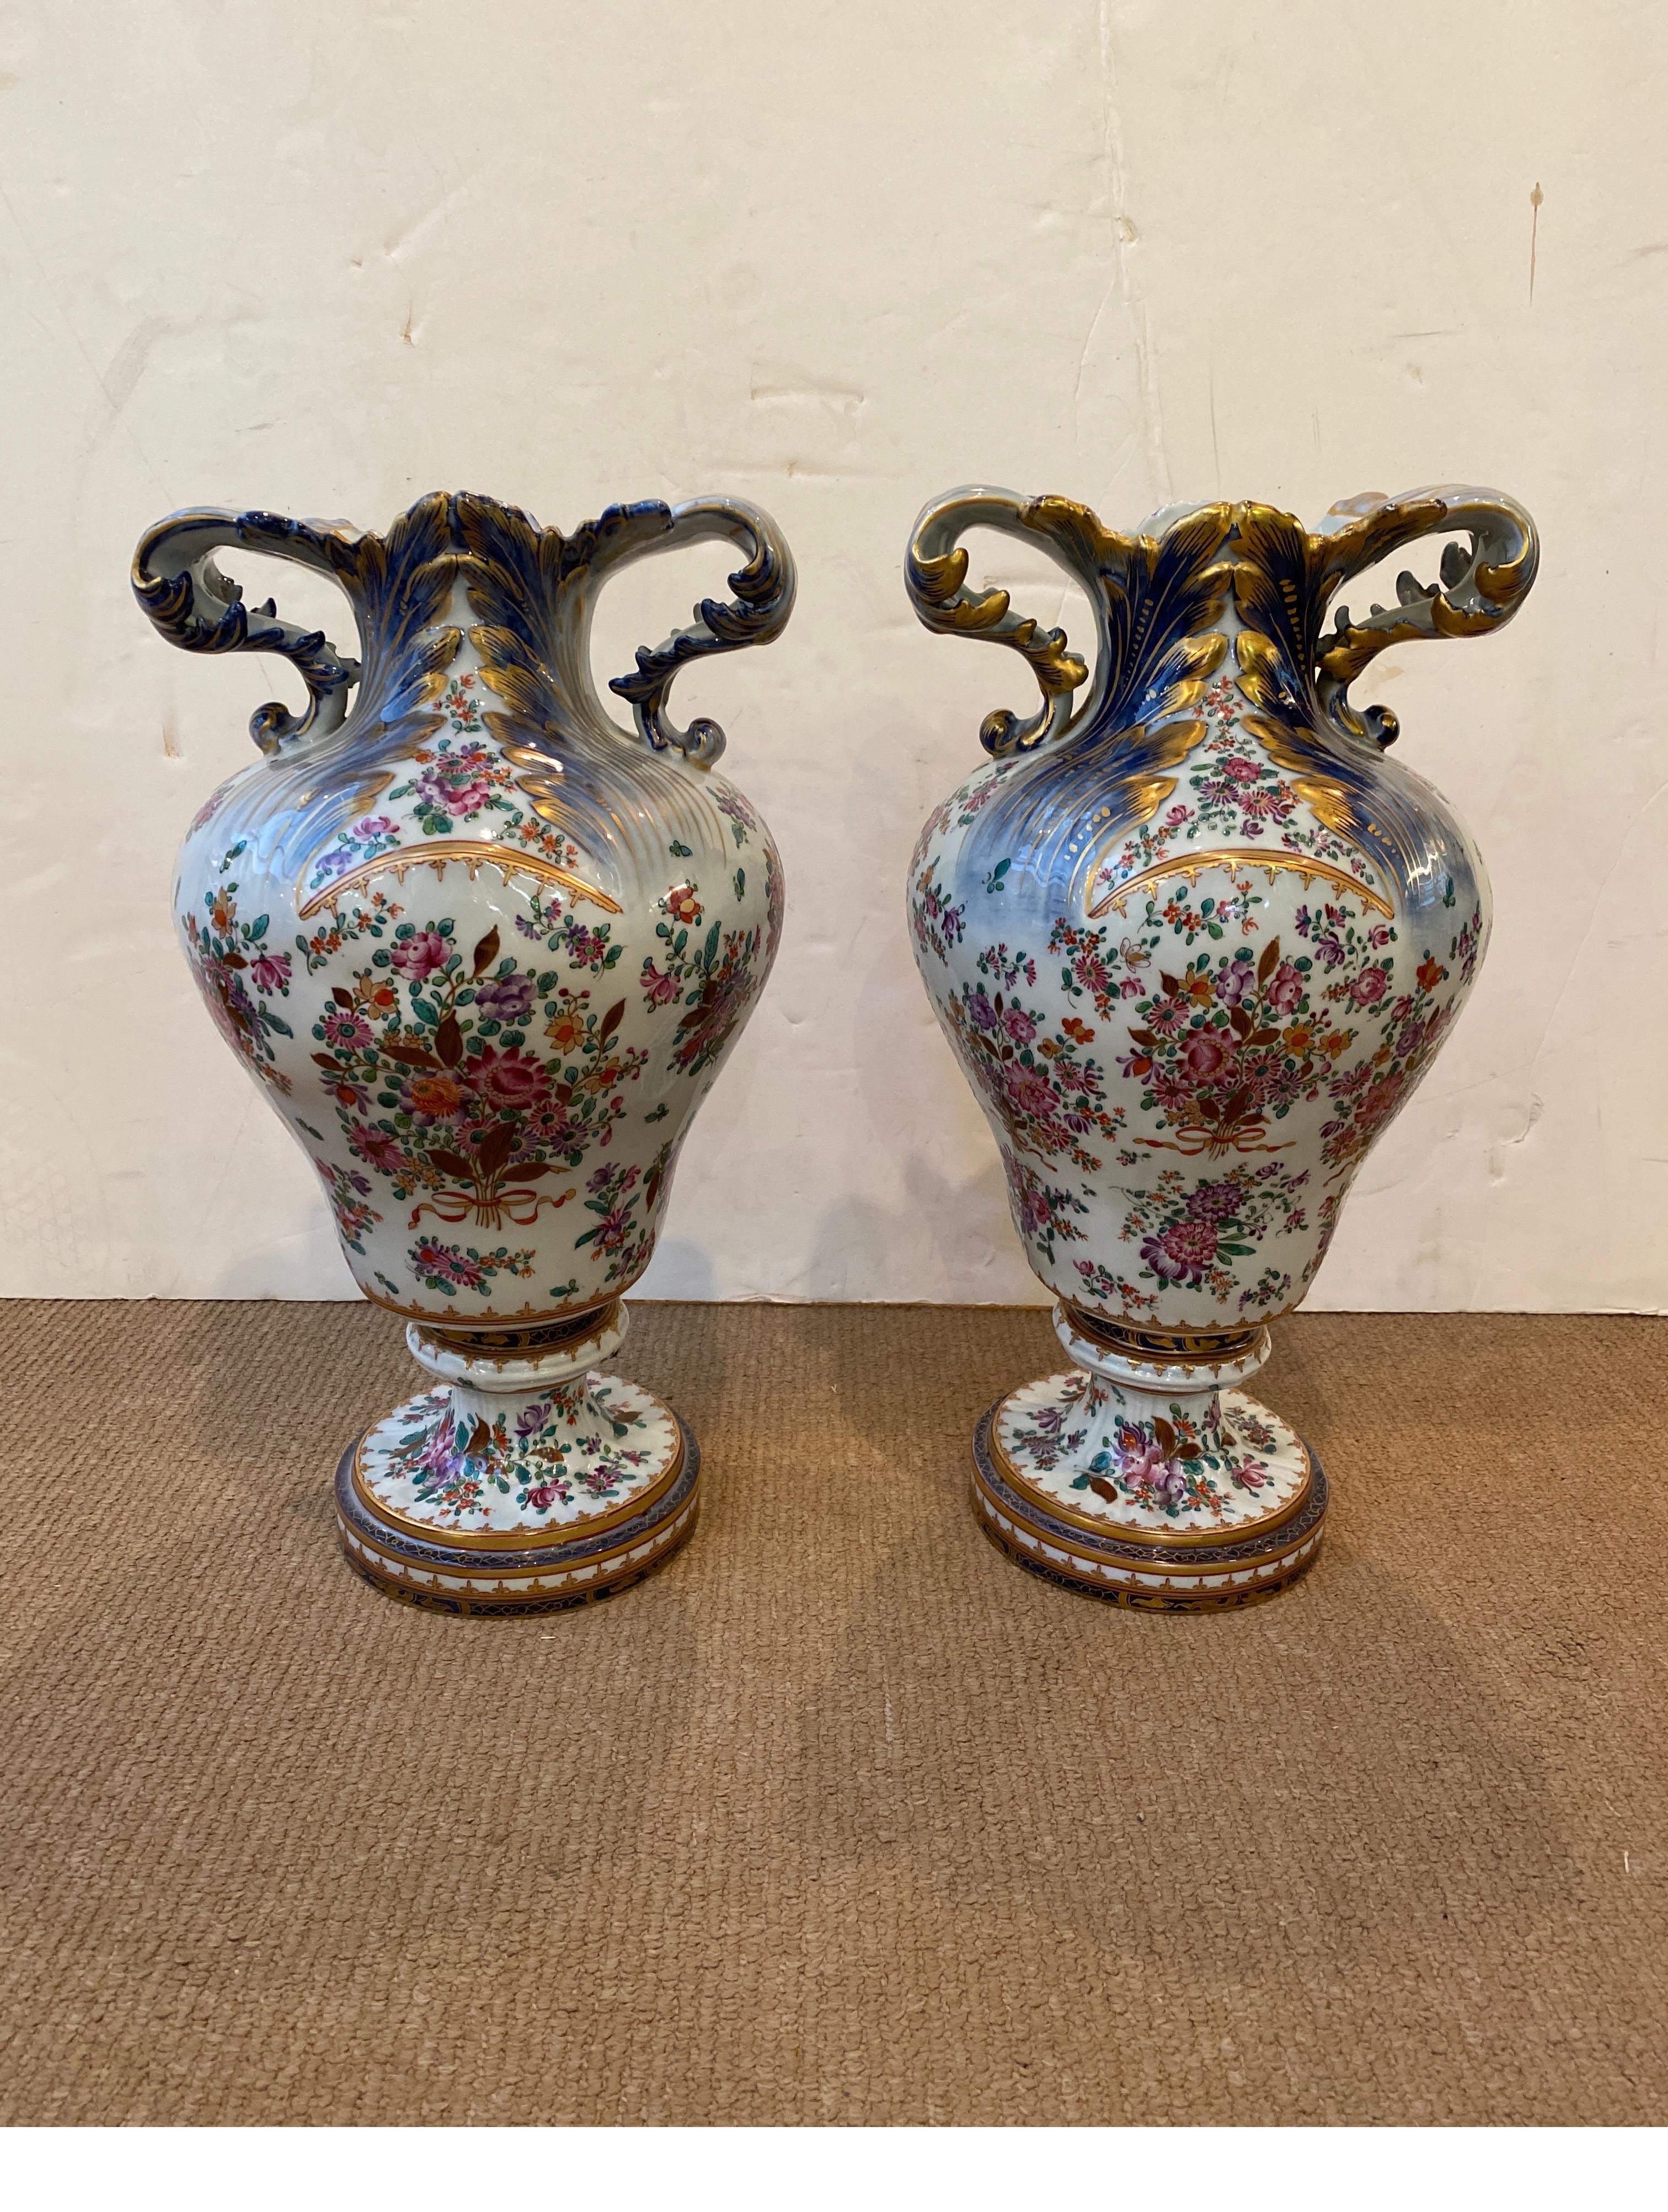 Pair of Porcelain Armorial Urns by Naples Capodimonte 19th Century For Sale 7